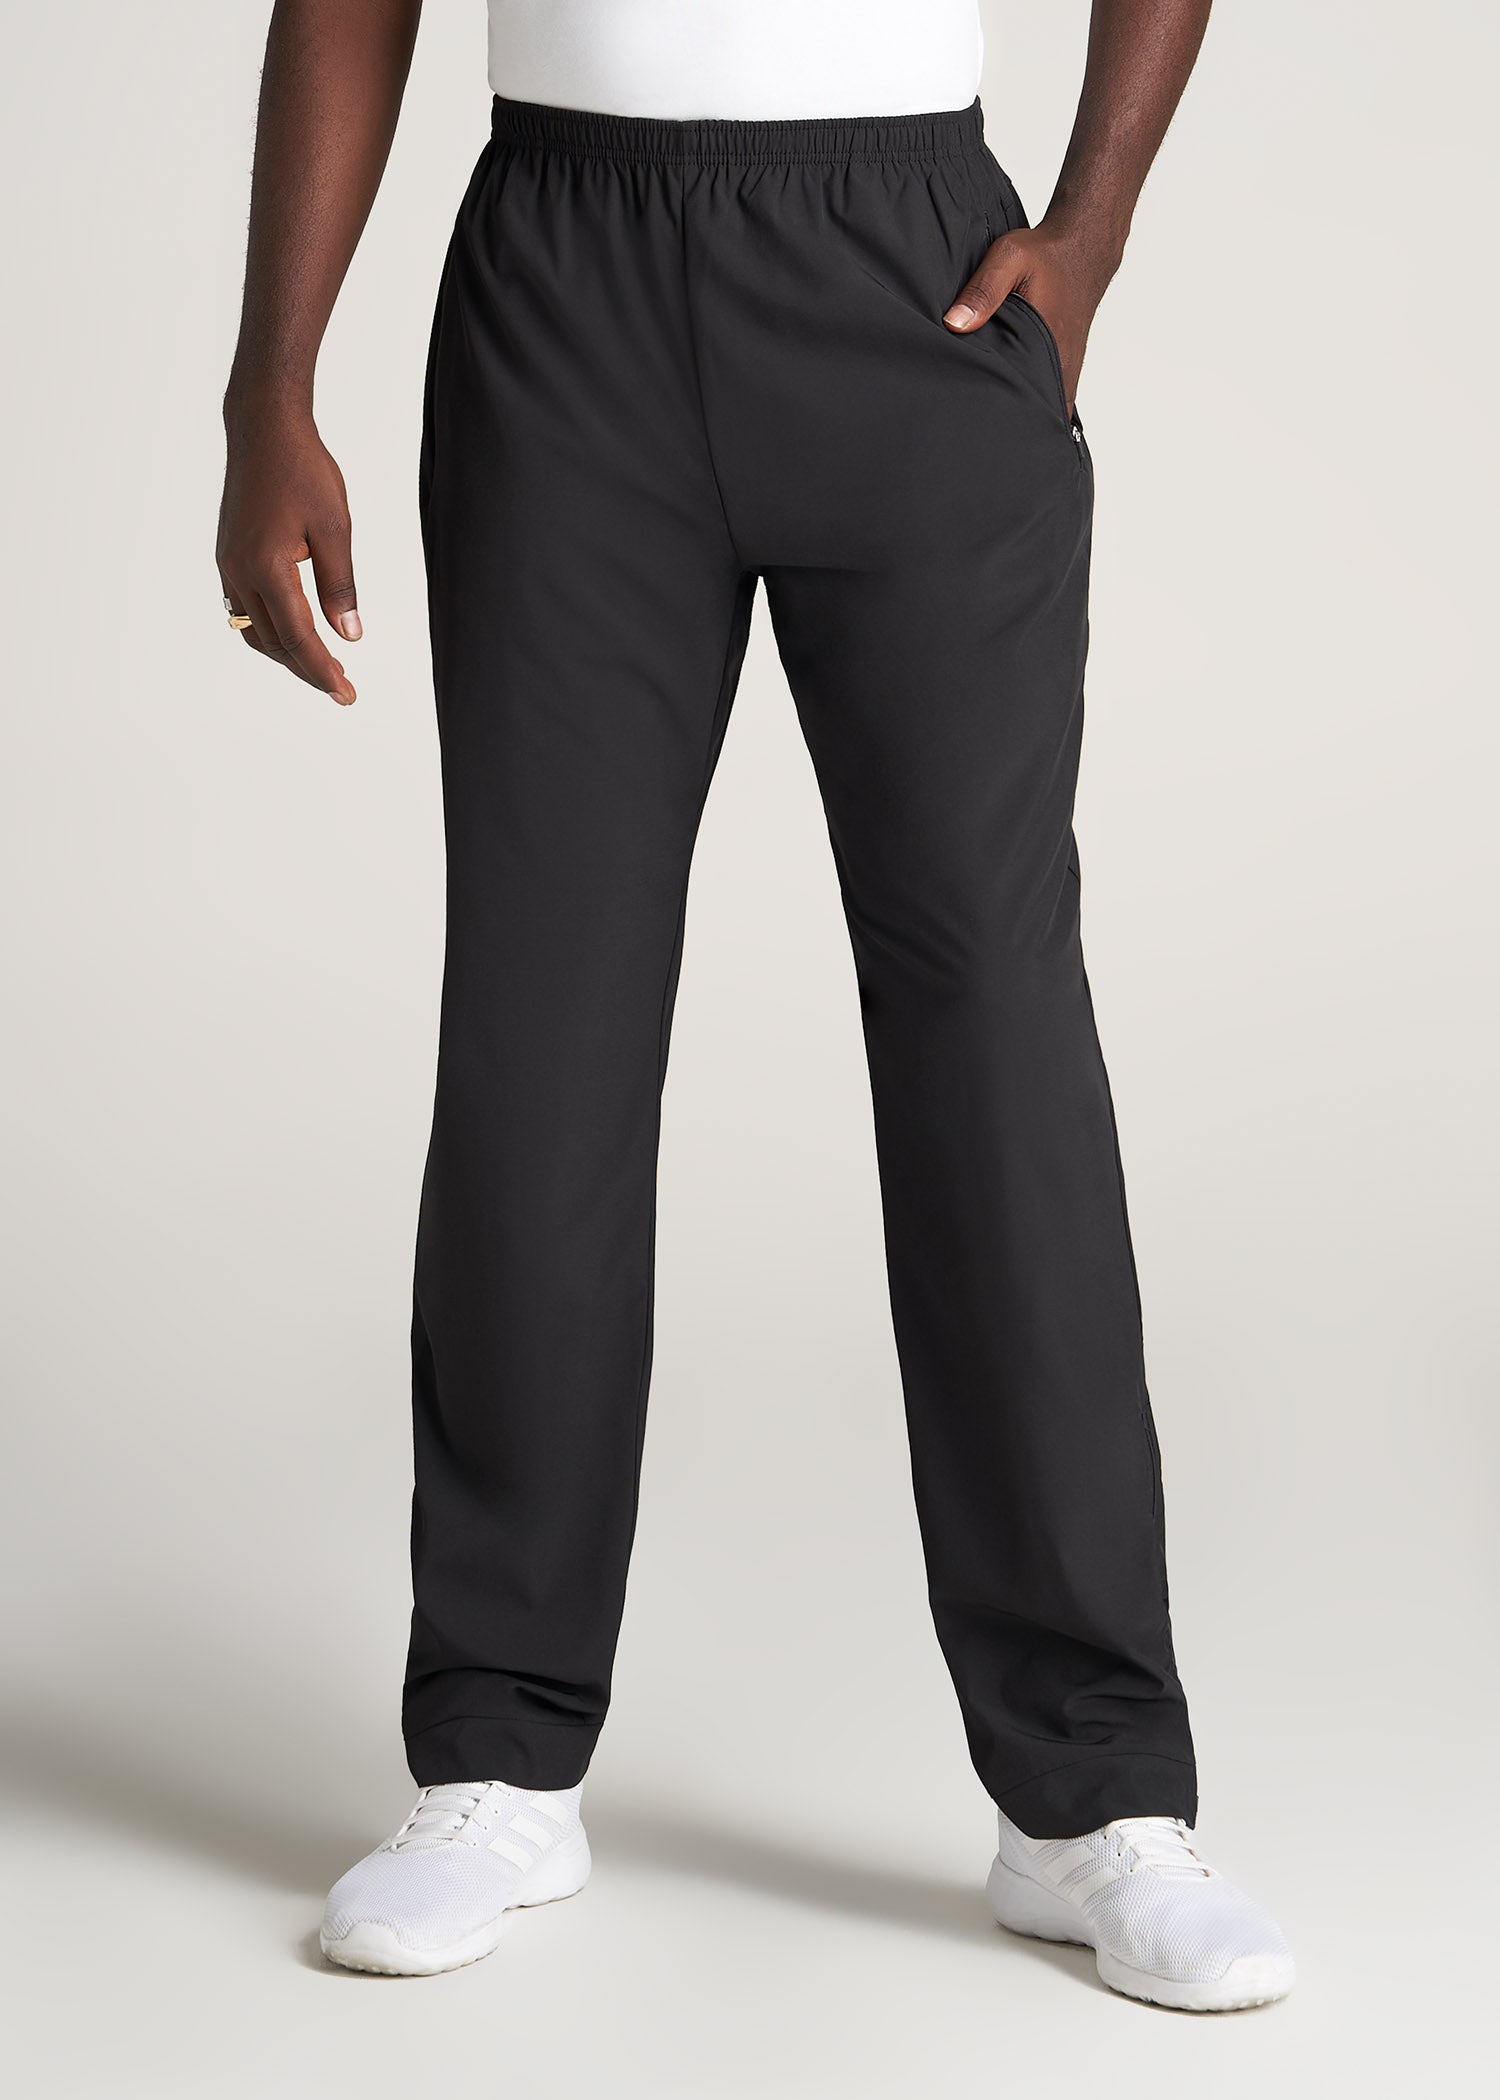    American-Tall-Men-RelaxedFit-LightWeight-AthleticPant-Black-front